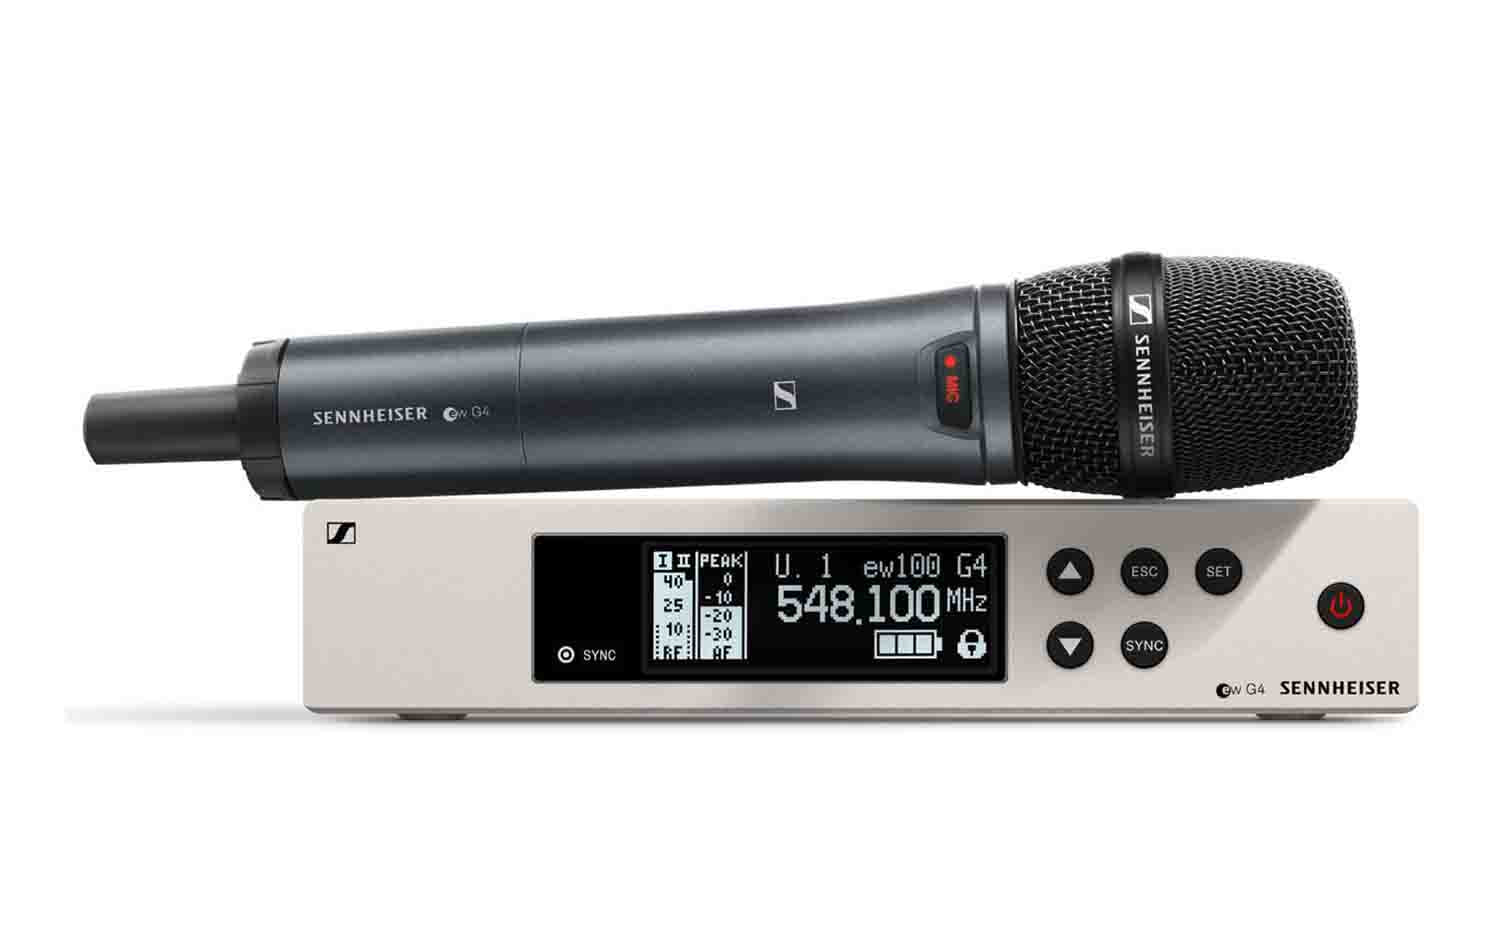 Sennheiser EW 100 G4-865-S-A Wireless Handheld Microphone System with MME 865 Capsule - 516 to 558 MHz - Hollywood DJ